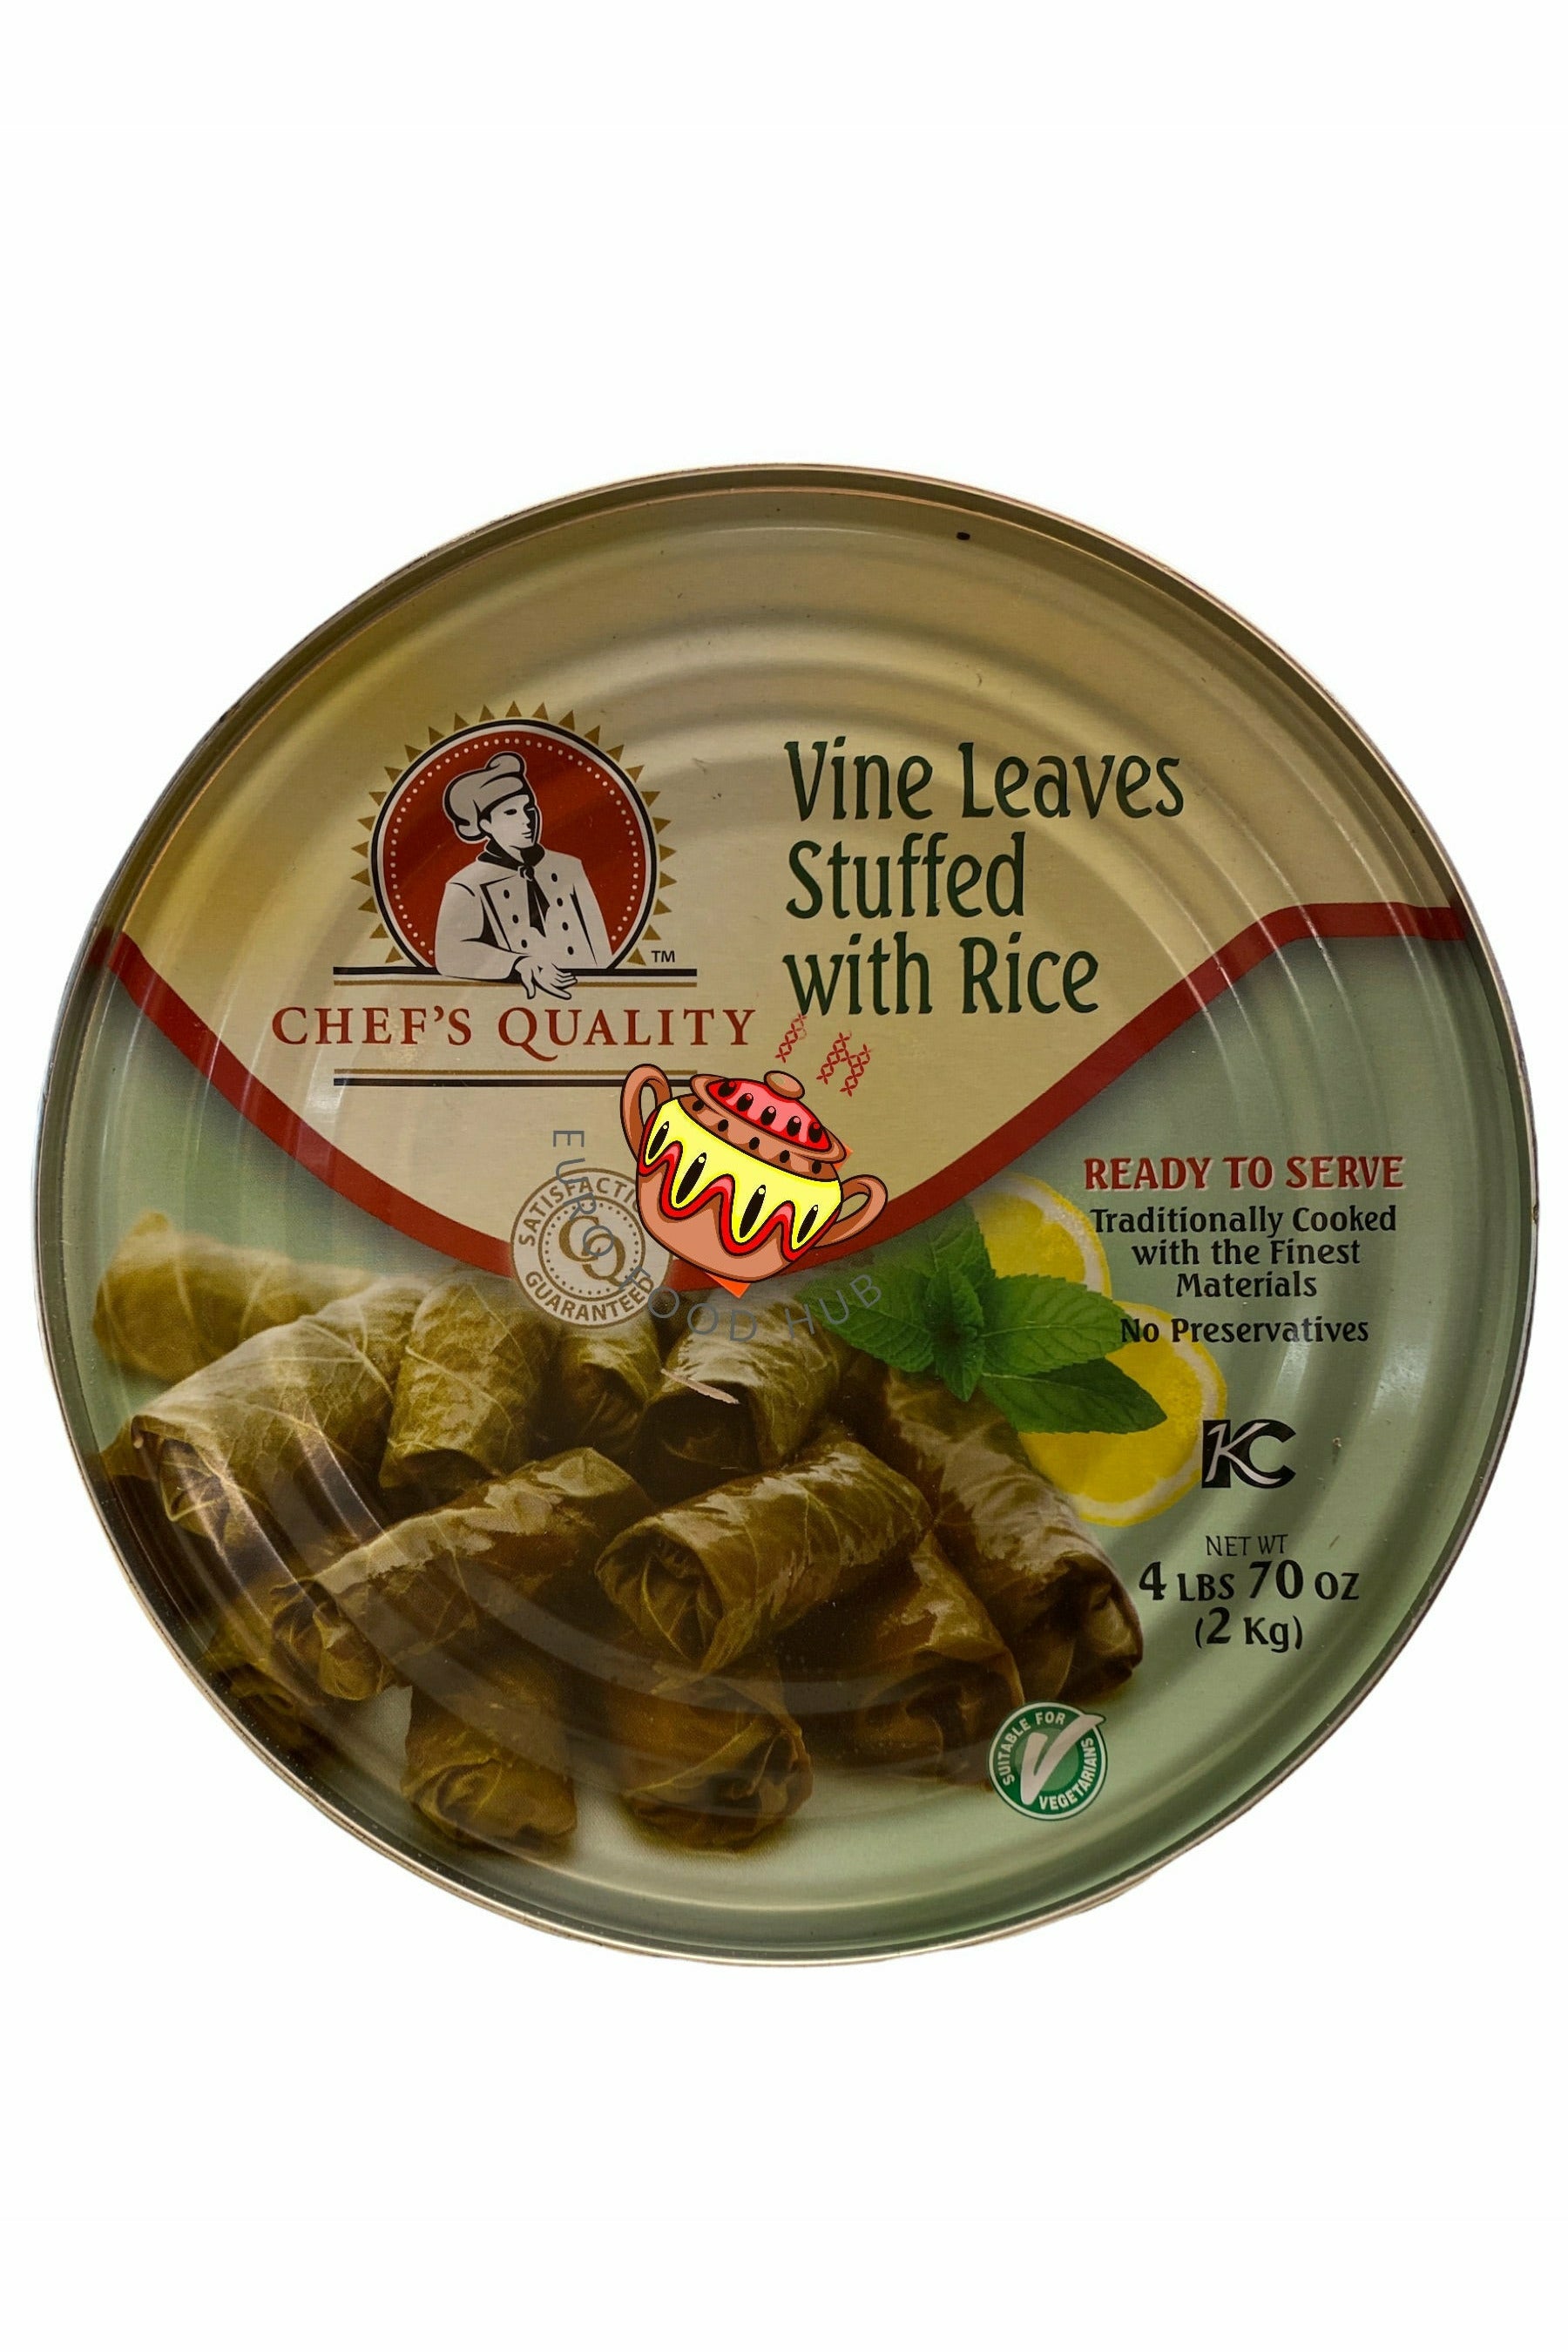 Vine Leaves stuffed with Rice - Party Size